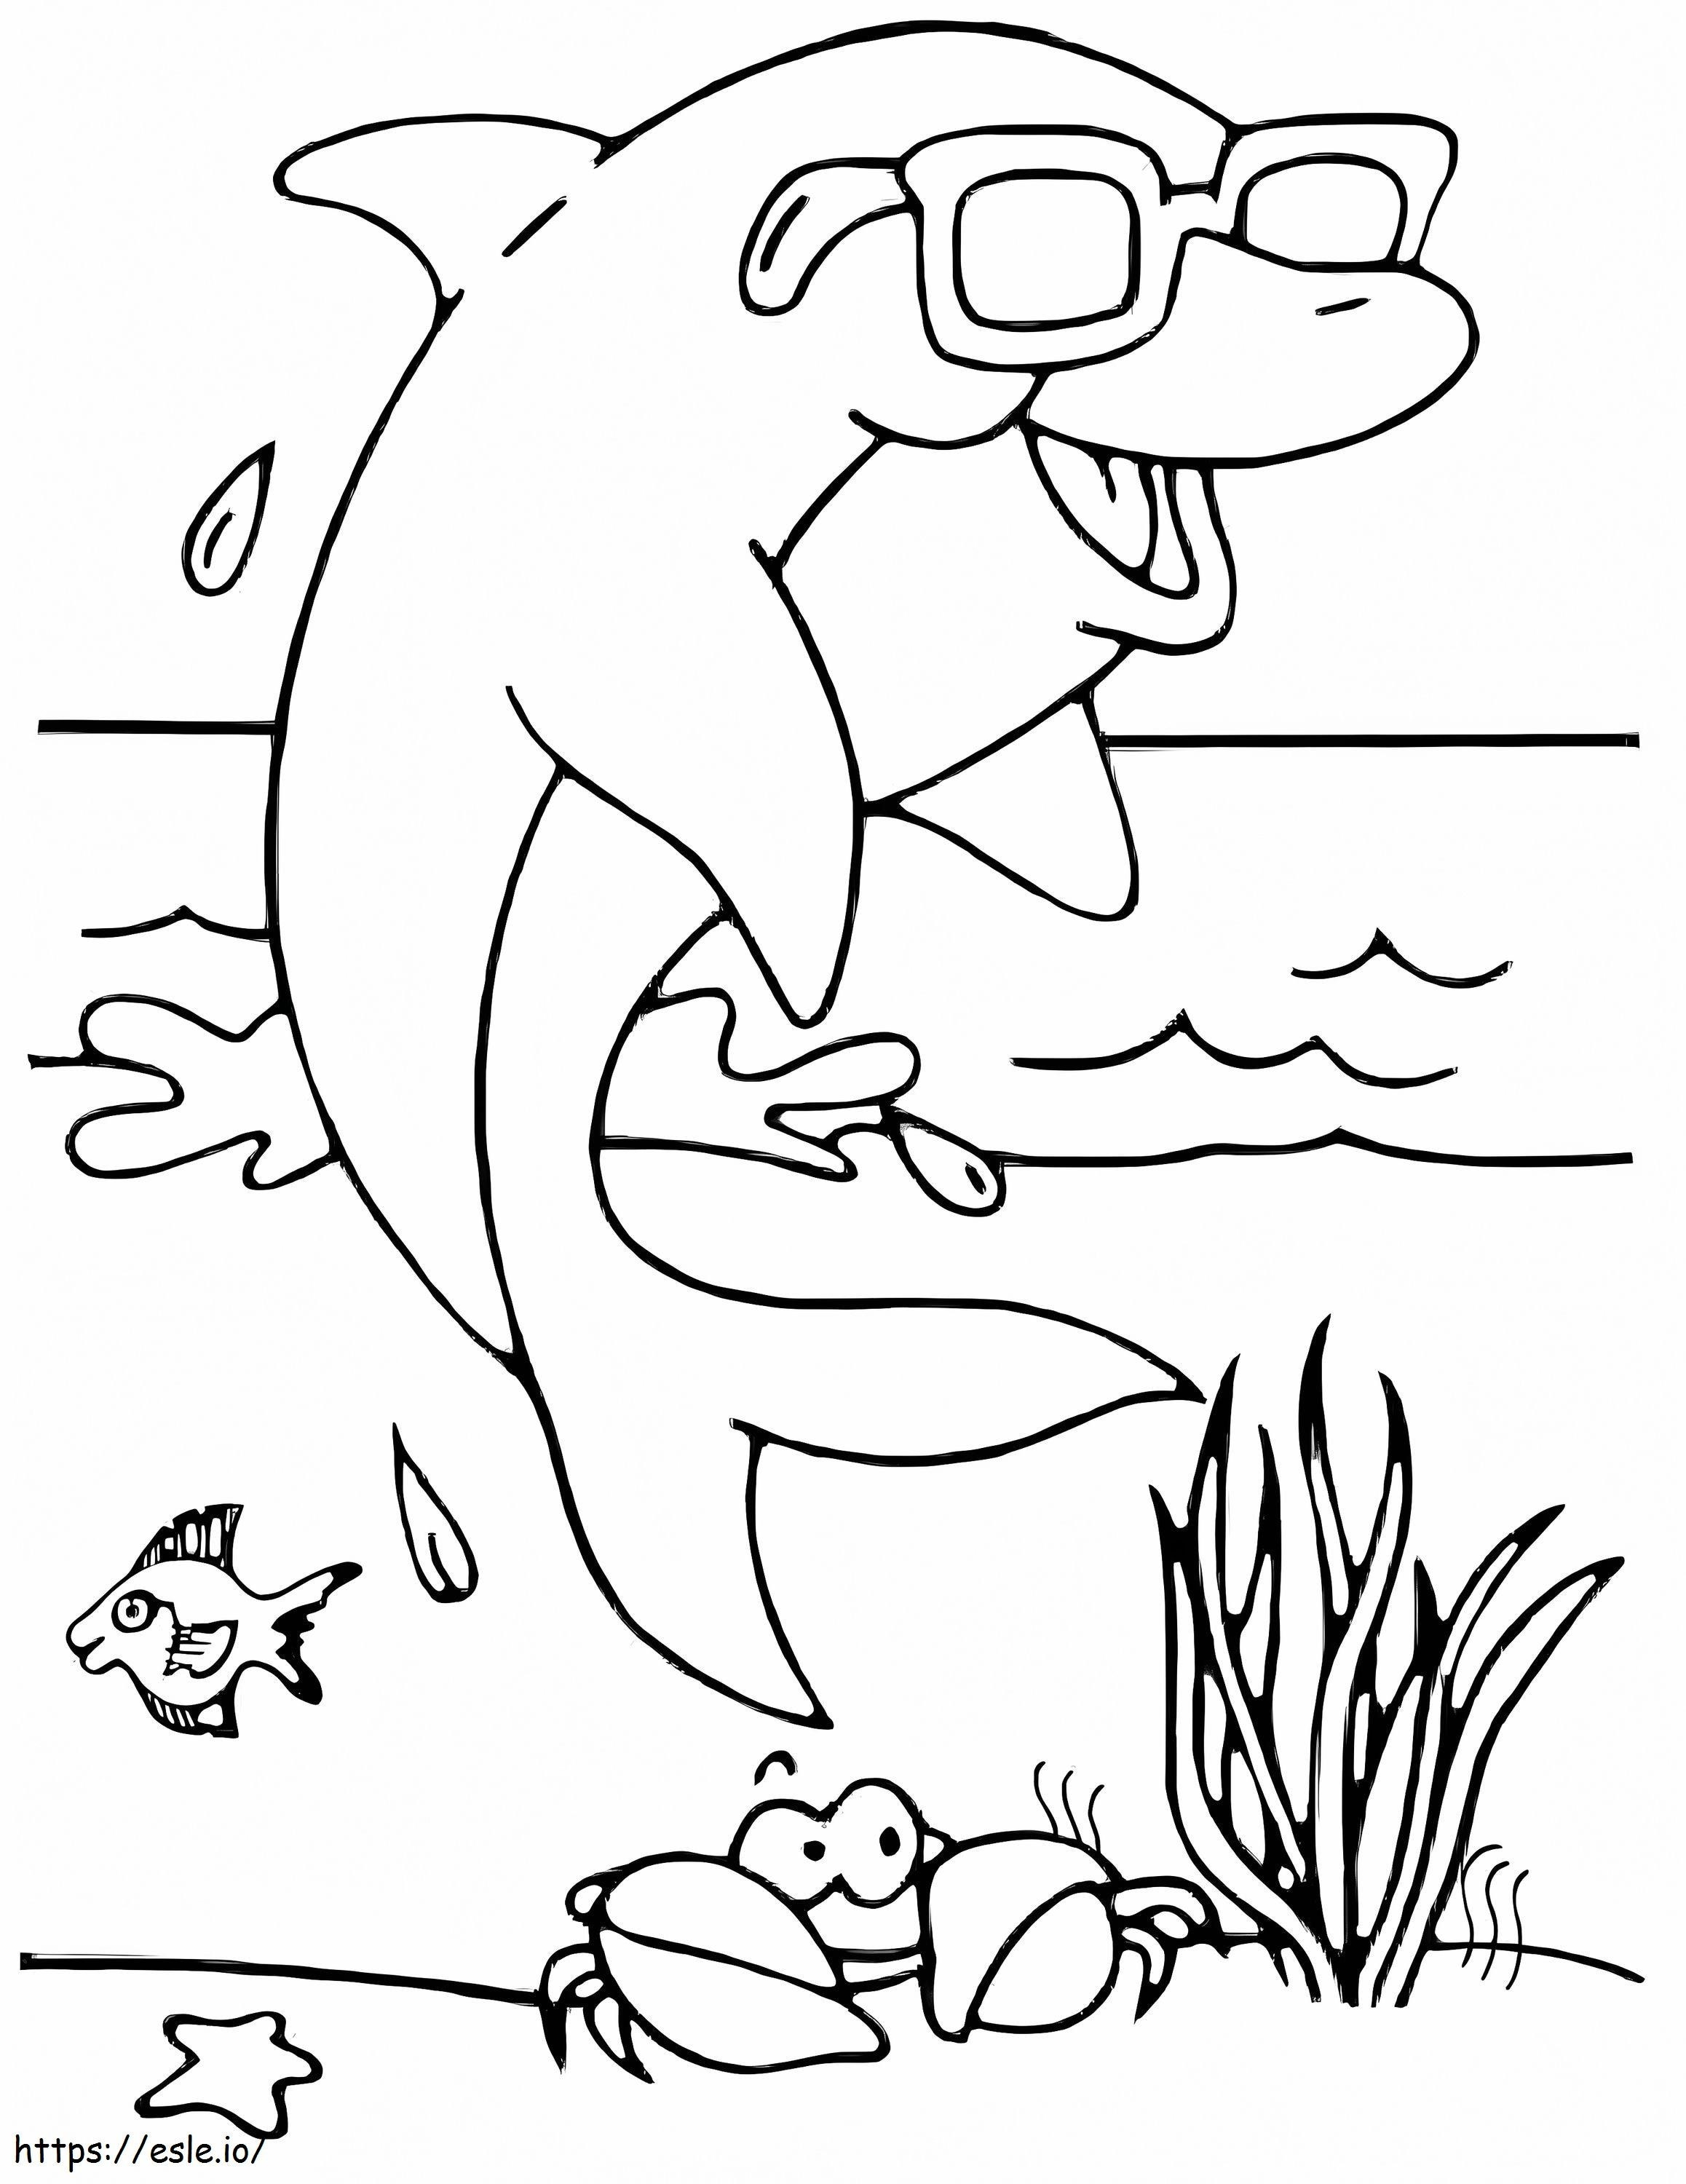 Dolphin With Sunglasses coloring page